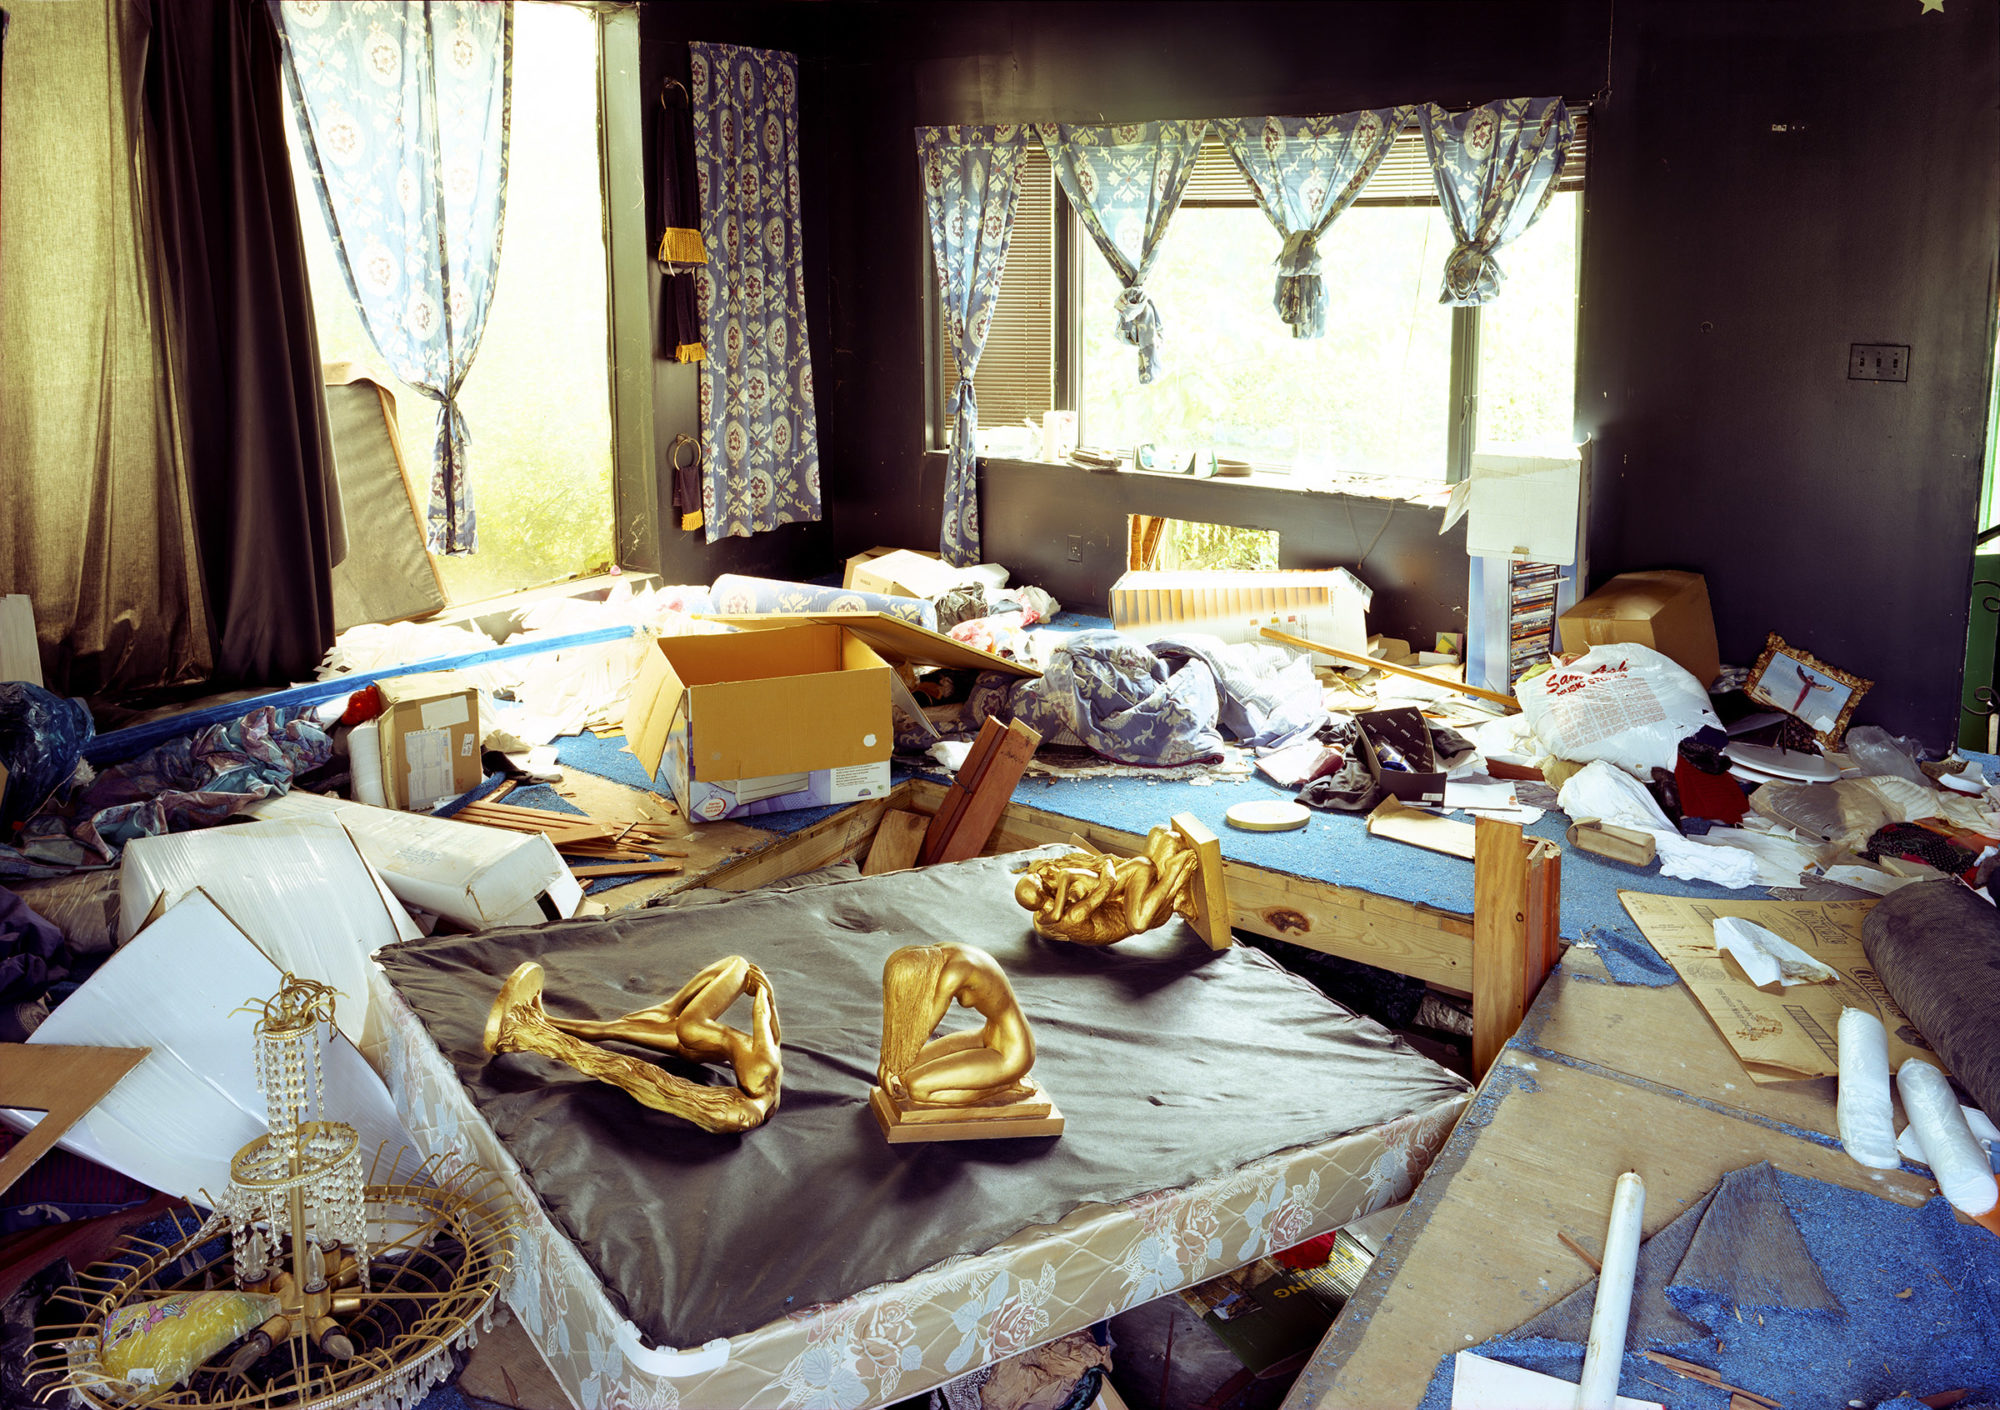 a room of mattresses. the mattresses are littered with junk--the one in the foreground features three golden statues, one of which is in a coital position